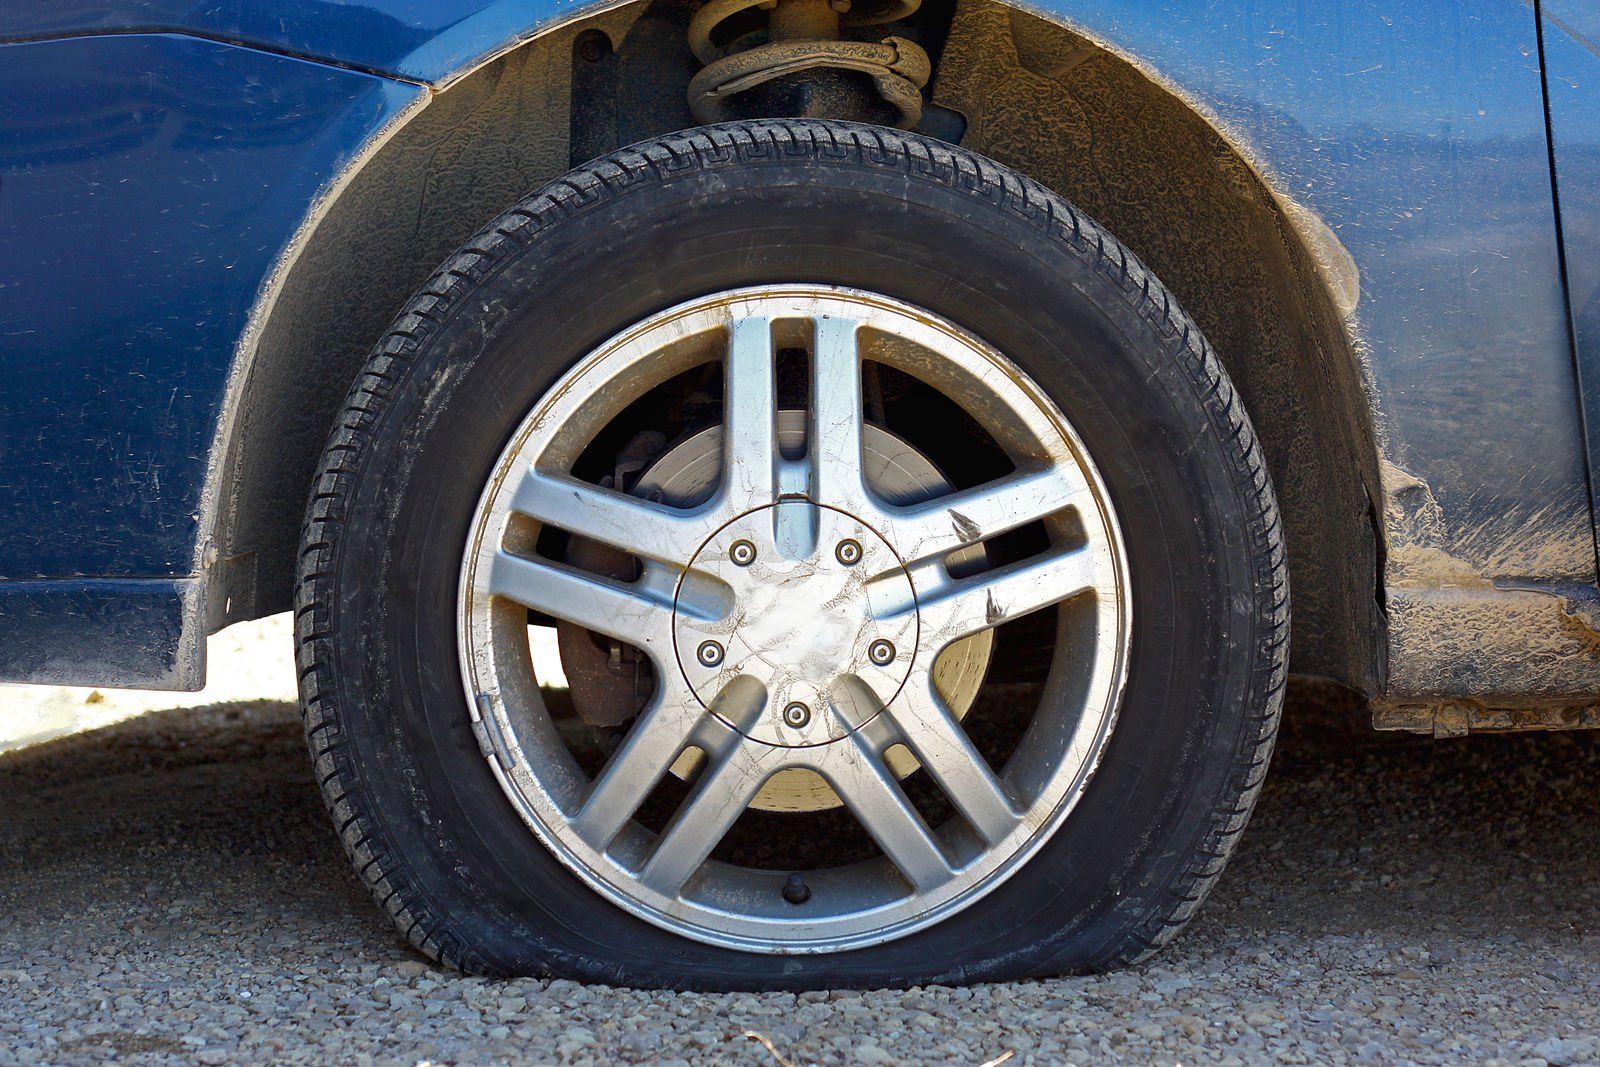 Does auto insurance cover slashed tires?